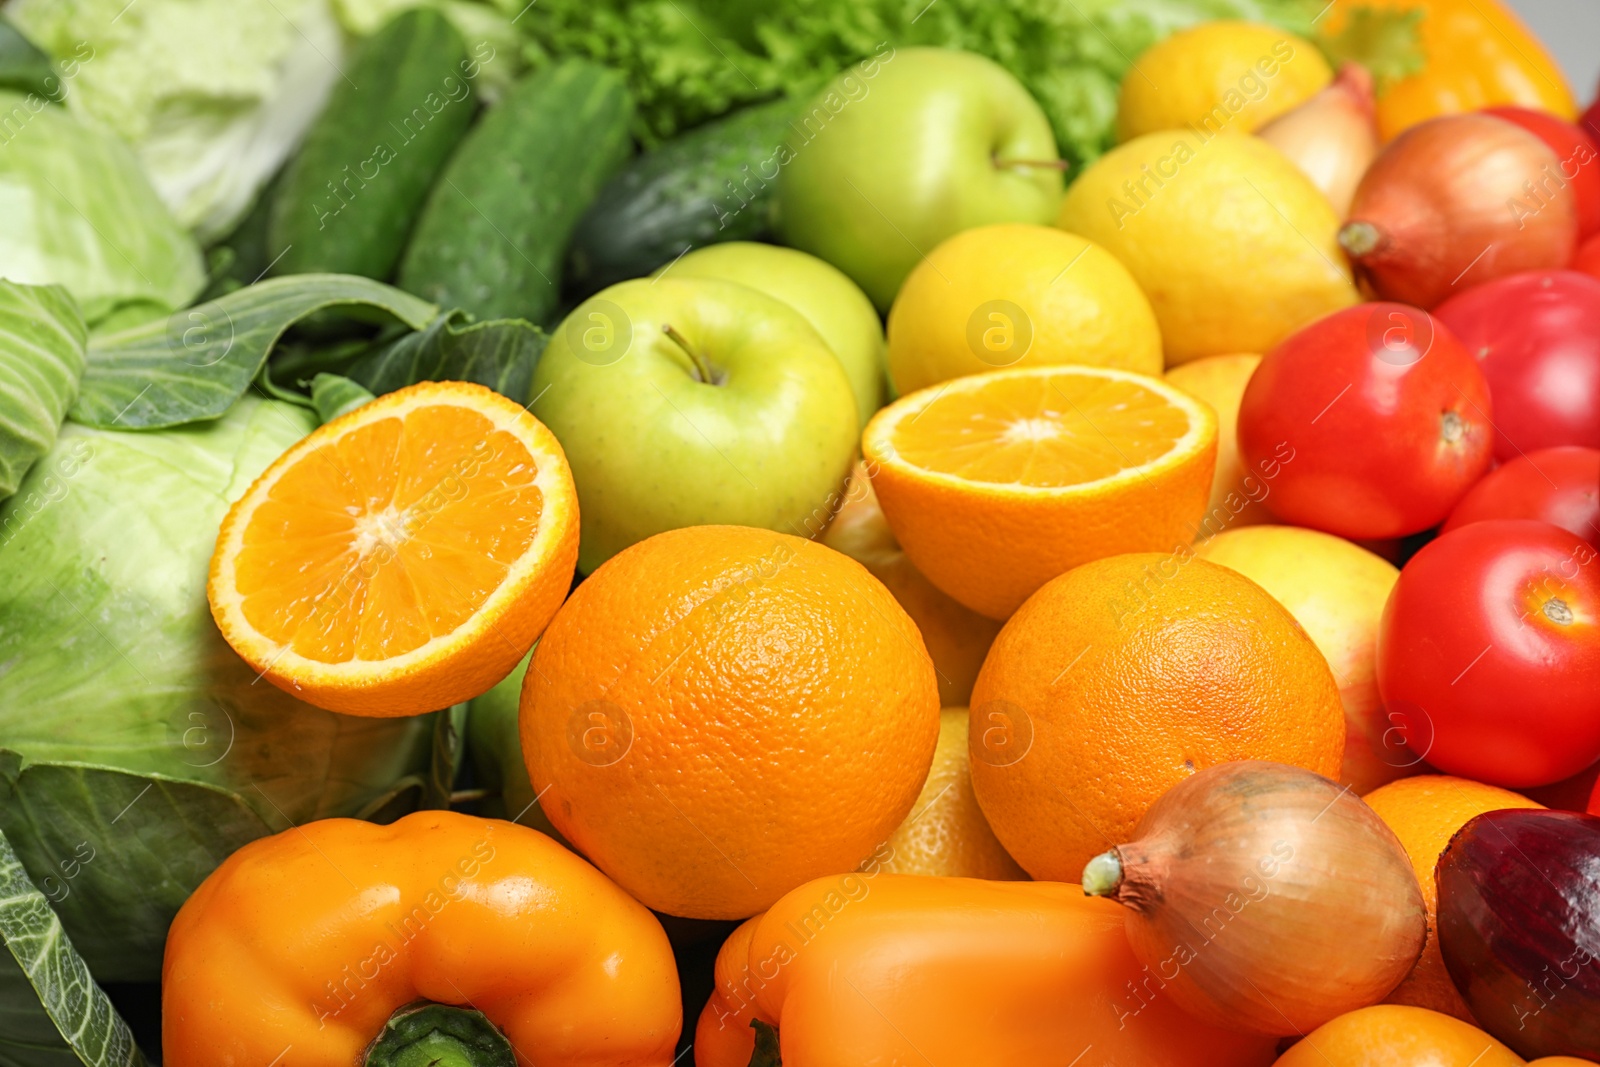 Photo of Colorful ripe fruits and vegetables as background, closeup